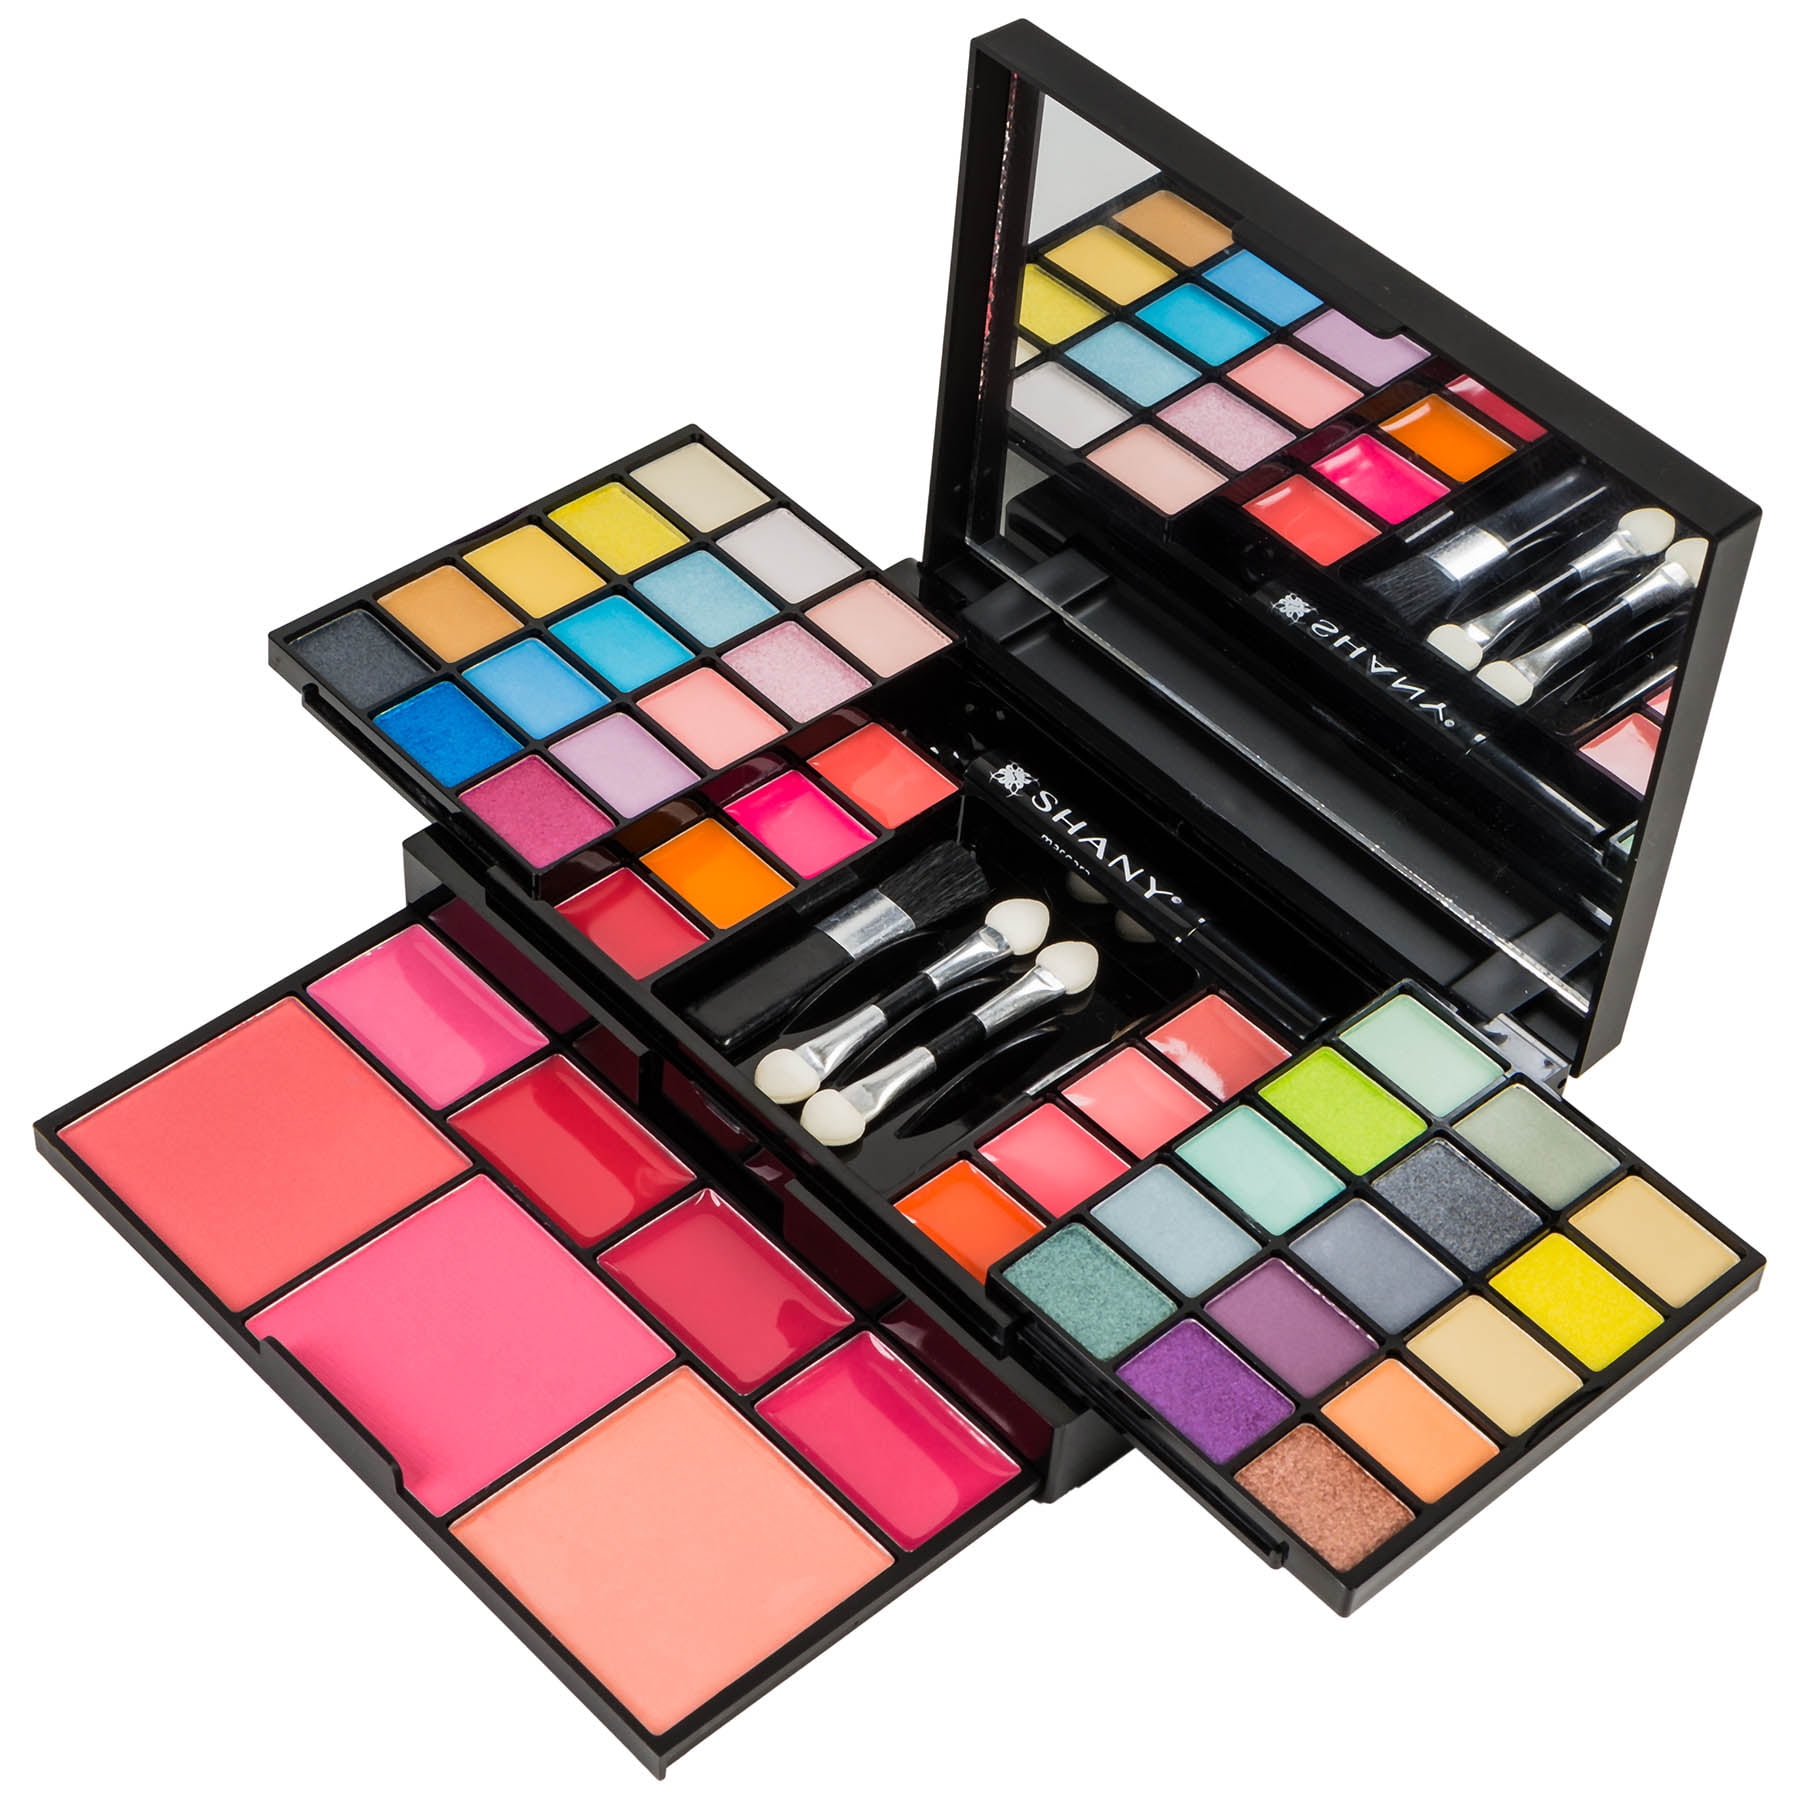 SHANY 'Fix Me Up' Makeup Kit - Eye Shadows, Lip Colors, Blushes, and ...